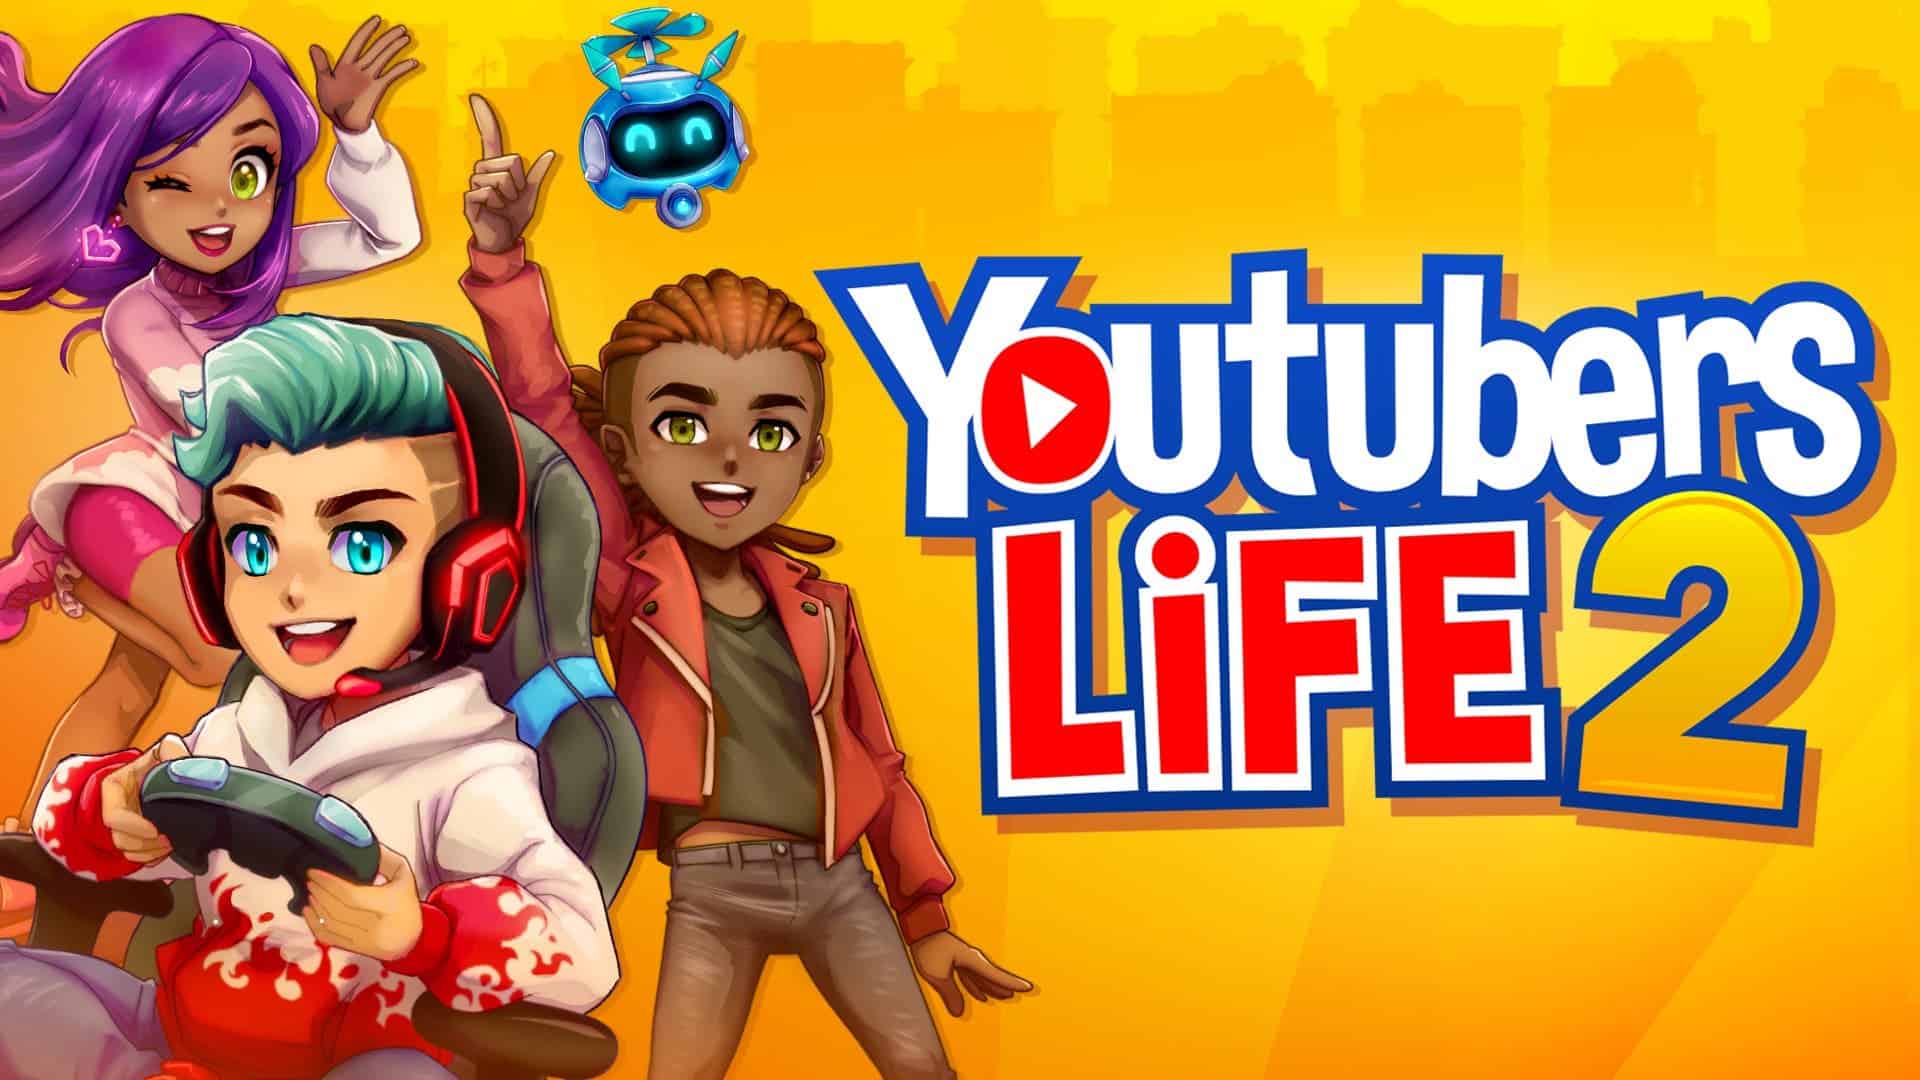 YouTubers Life 2 enters pre-registration stage on Android and iOS